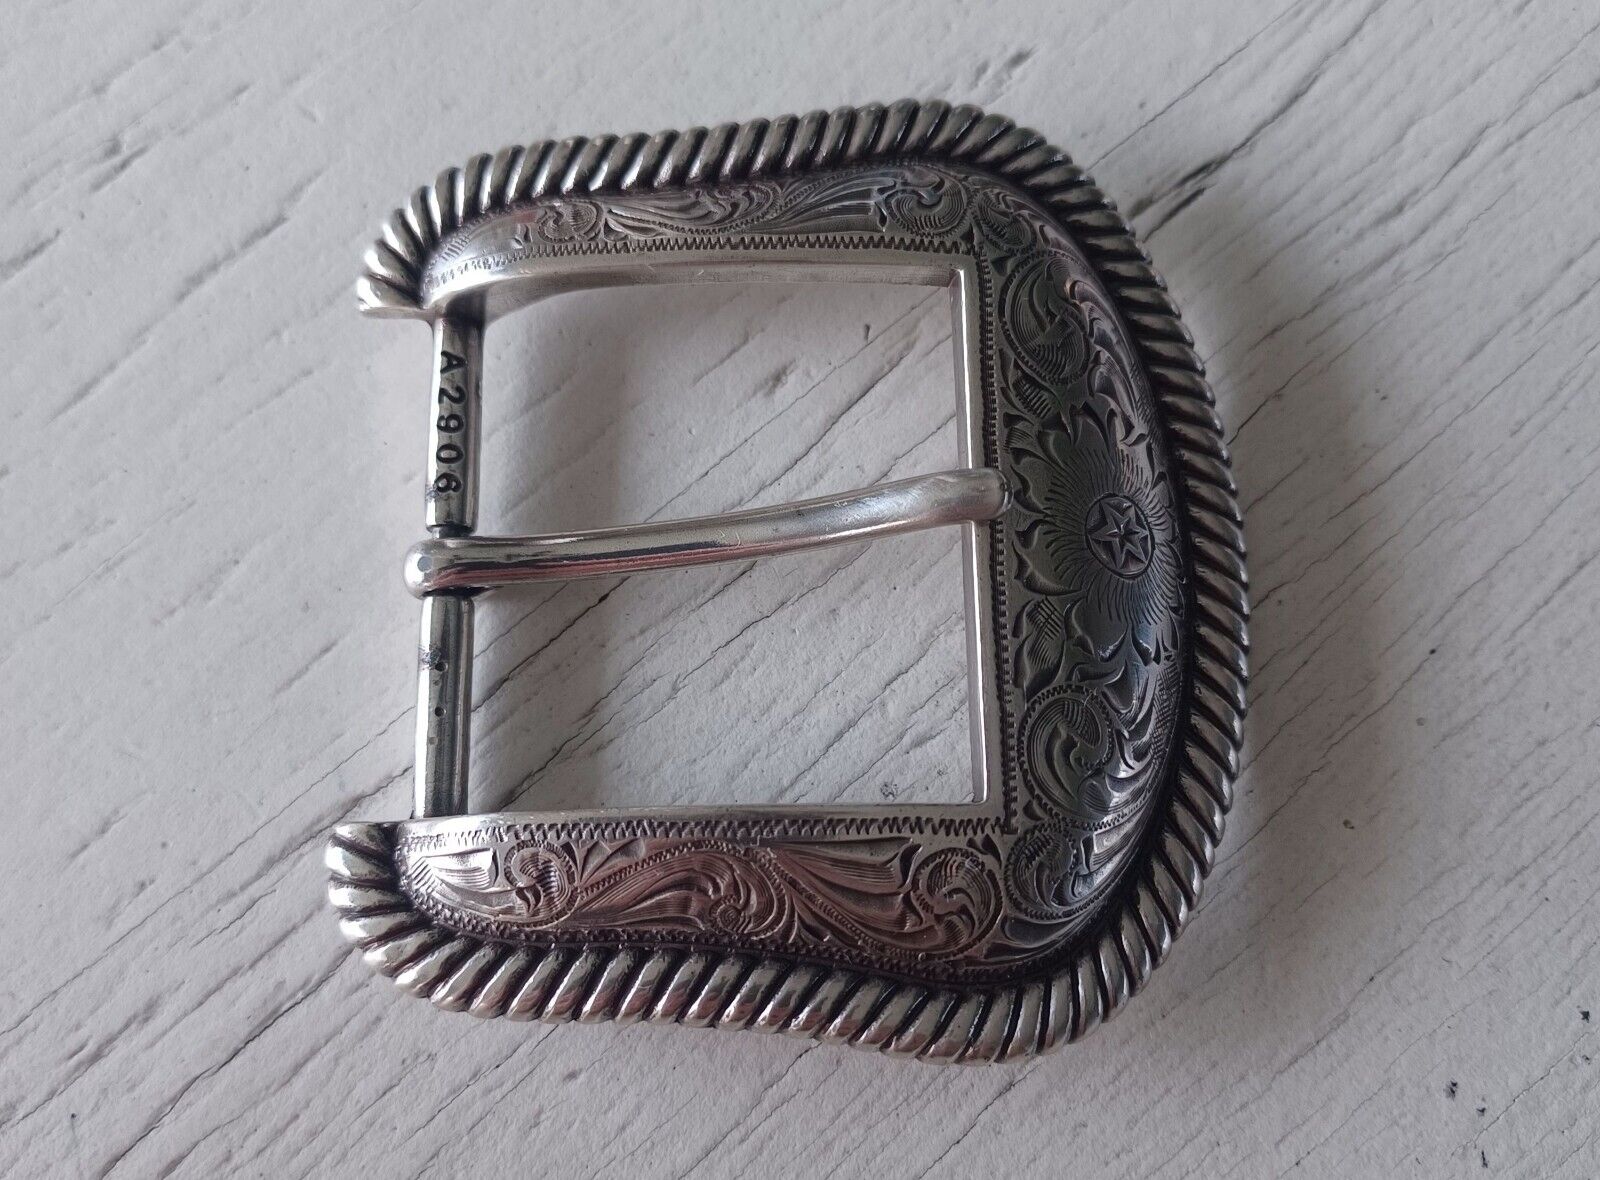 Vintage Silver Swirl Country Western Belt Buckle Cowgirl Cowboy Roped Edge